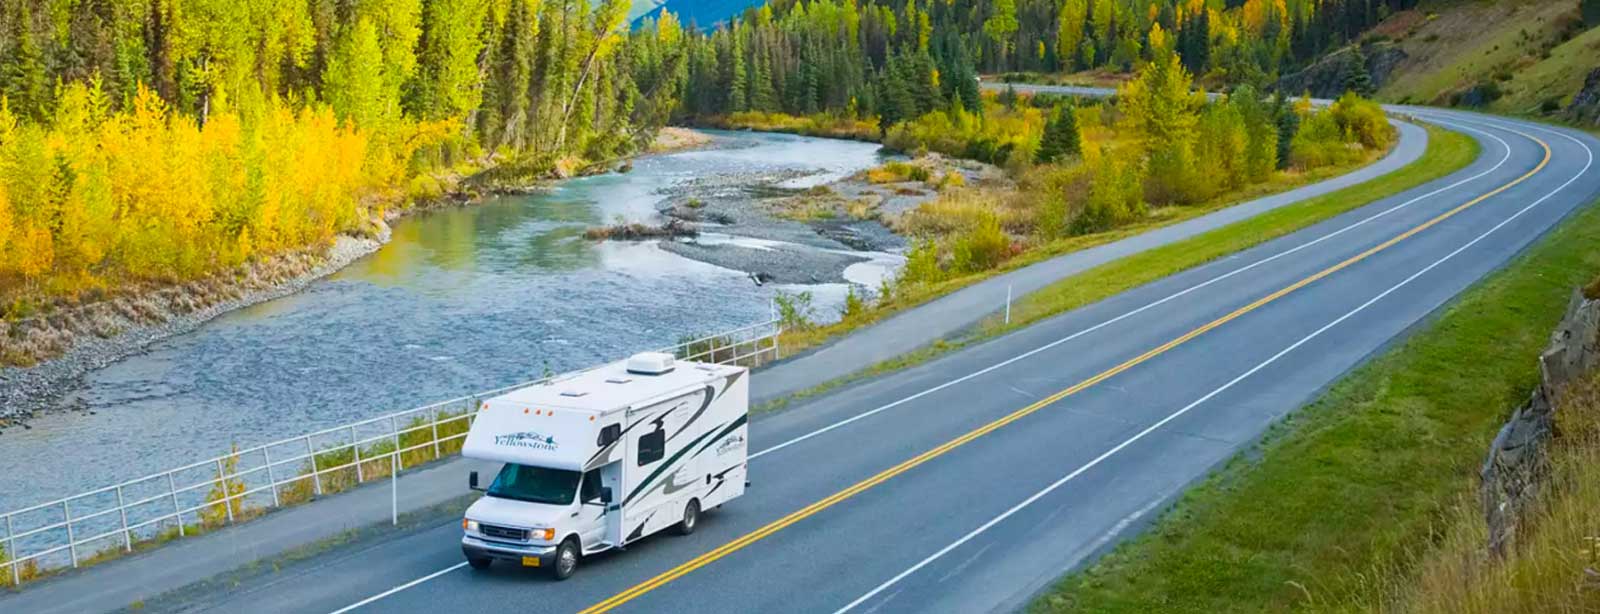 The differenct types of campervan and motorhome